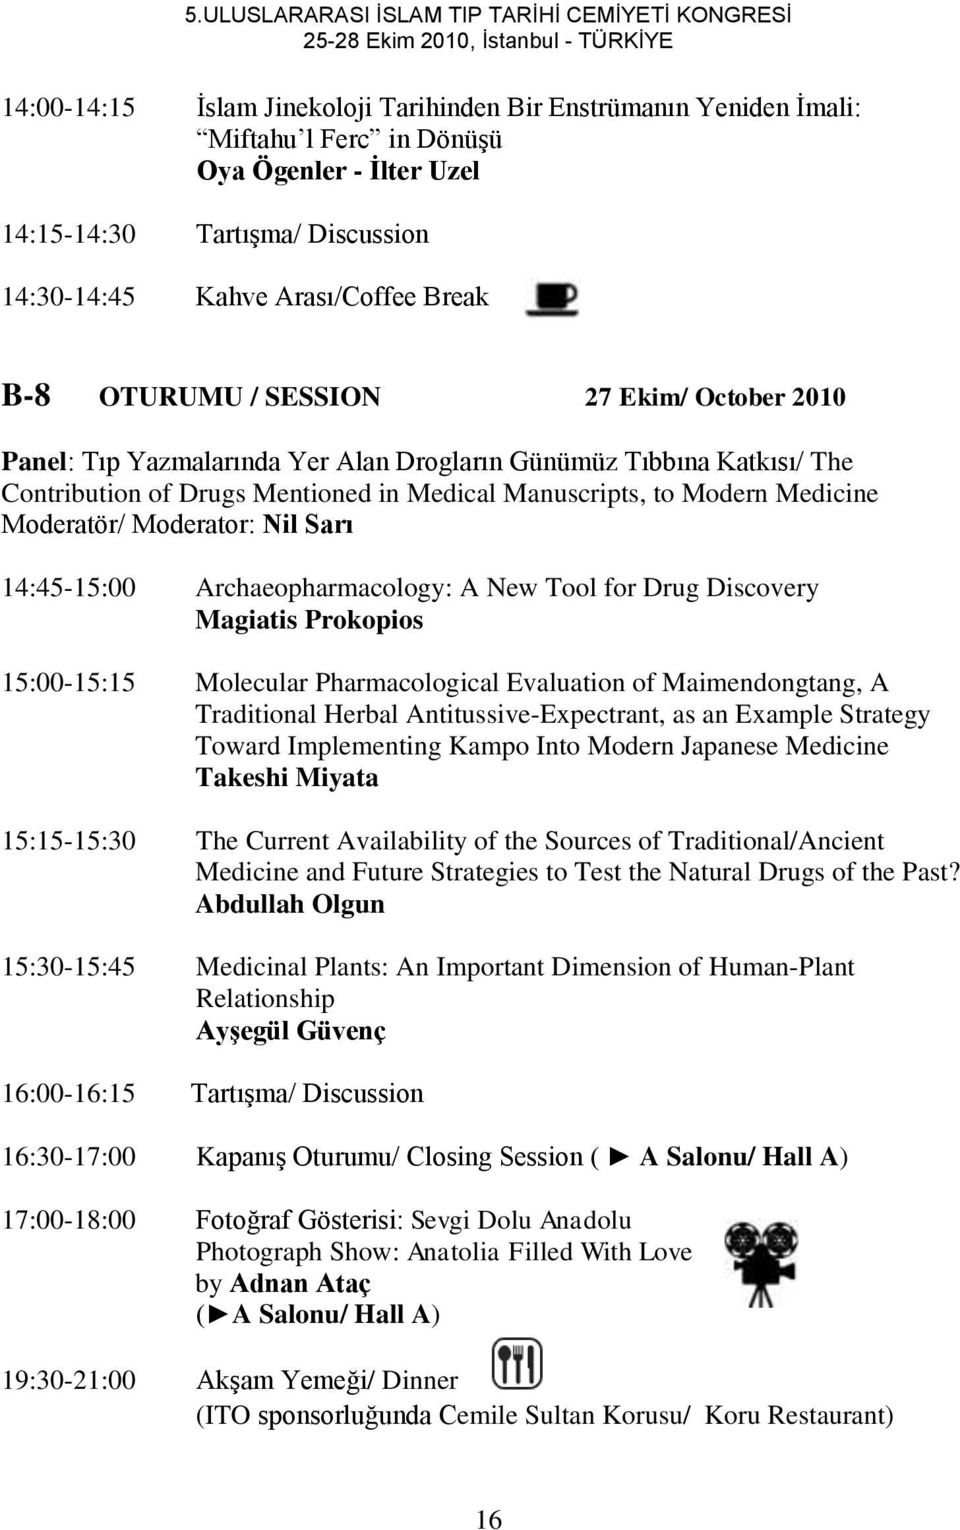 Contribution of Drugs Mentioned in Medical Manuscripts, to Modern Medicine Moderatör/ Moderator: Nil Sarı 14:45-15:00 Archaeopharmacology: A New Tool for Drug Discovery Magiatis Prokopios 15:00-15:15